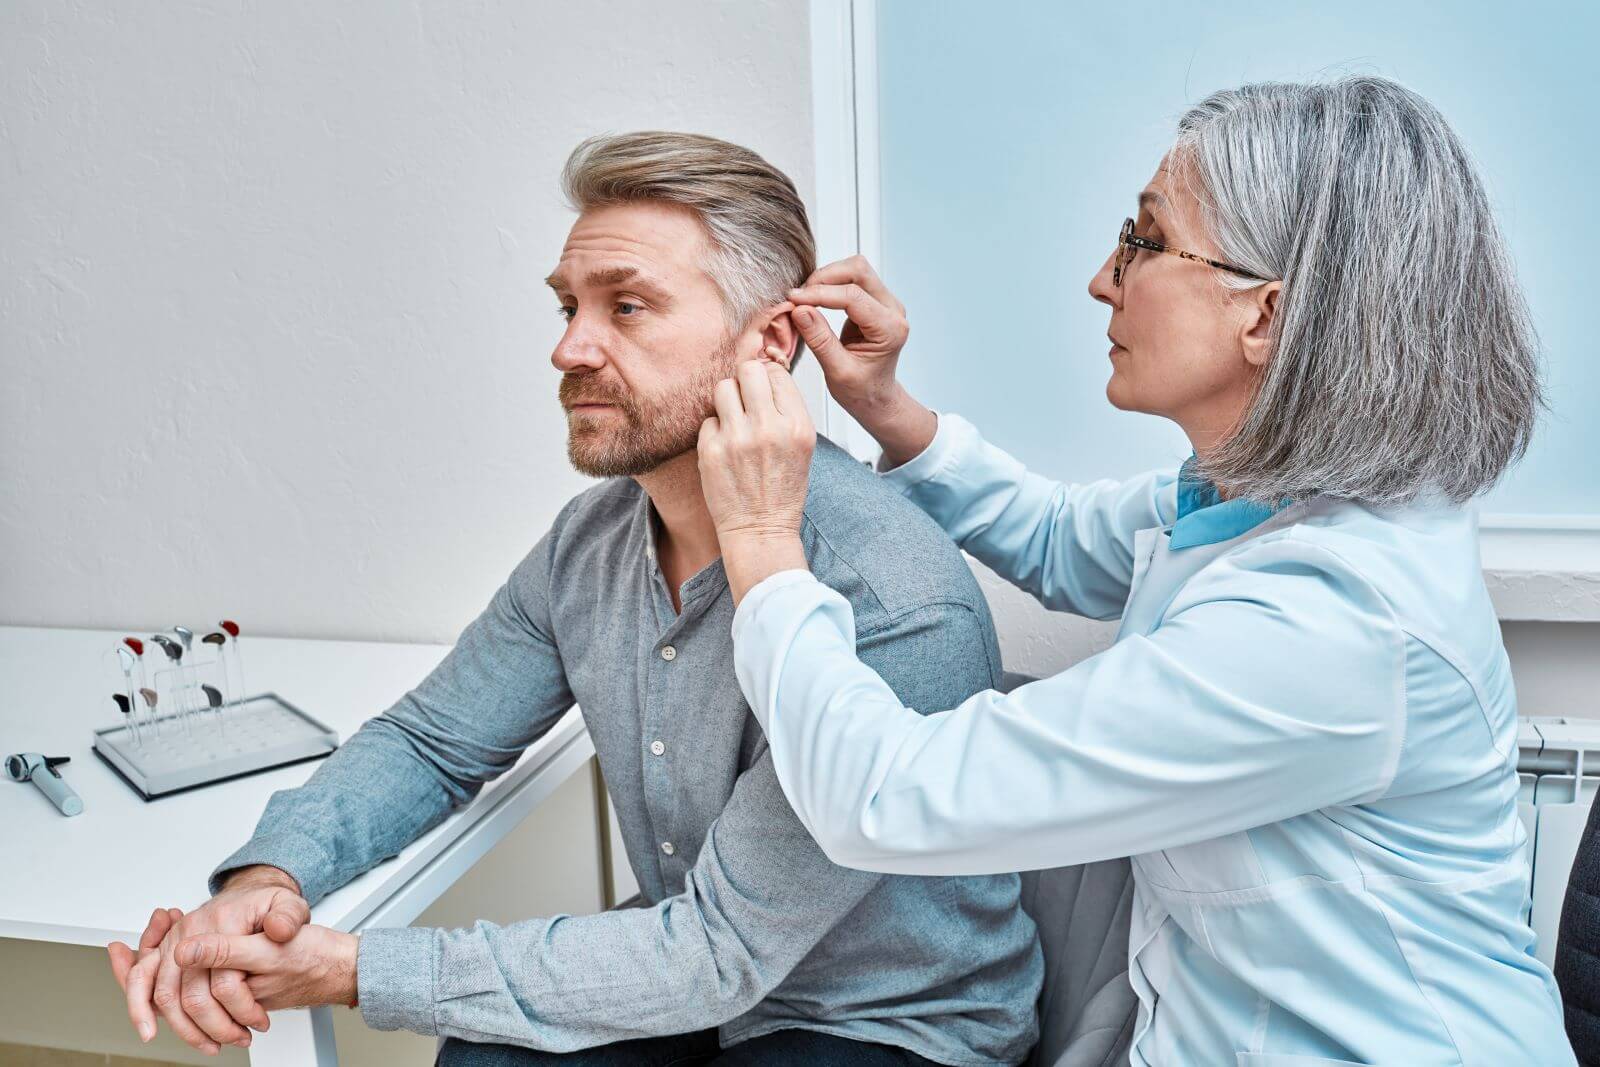 Audiologist fitting a hearing aid to a patient's ear